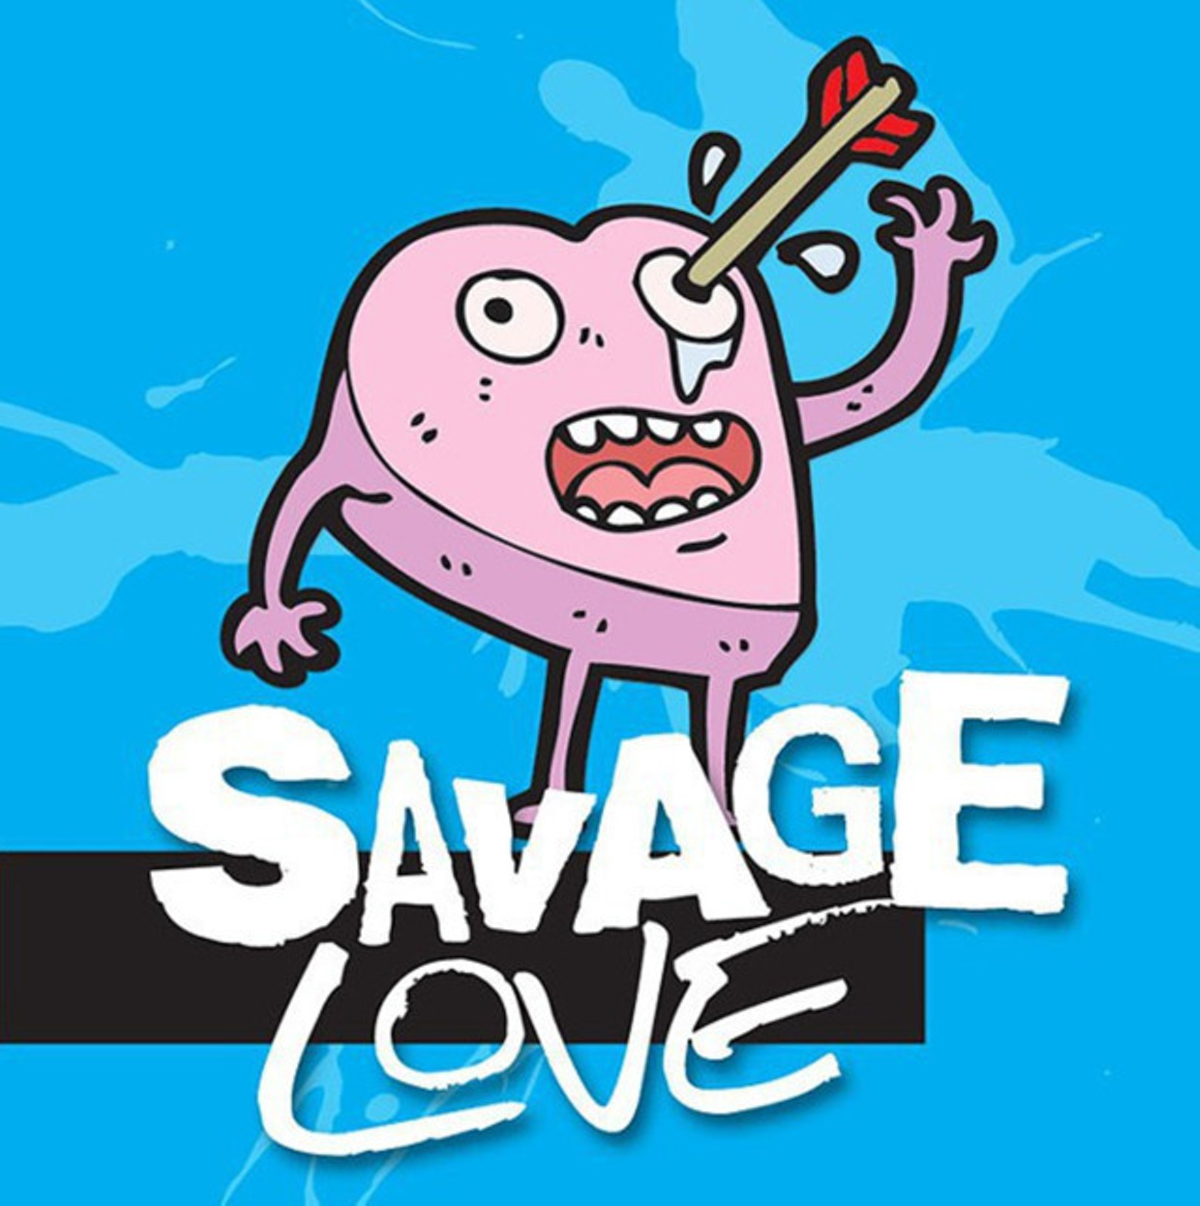 Savage Love If you cant live with the risks of being exposed to STIs, sex parties probably arent for you Columns Tampa Creative Loafing Tampa pic